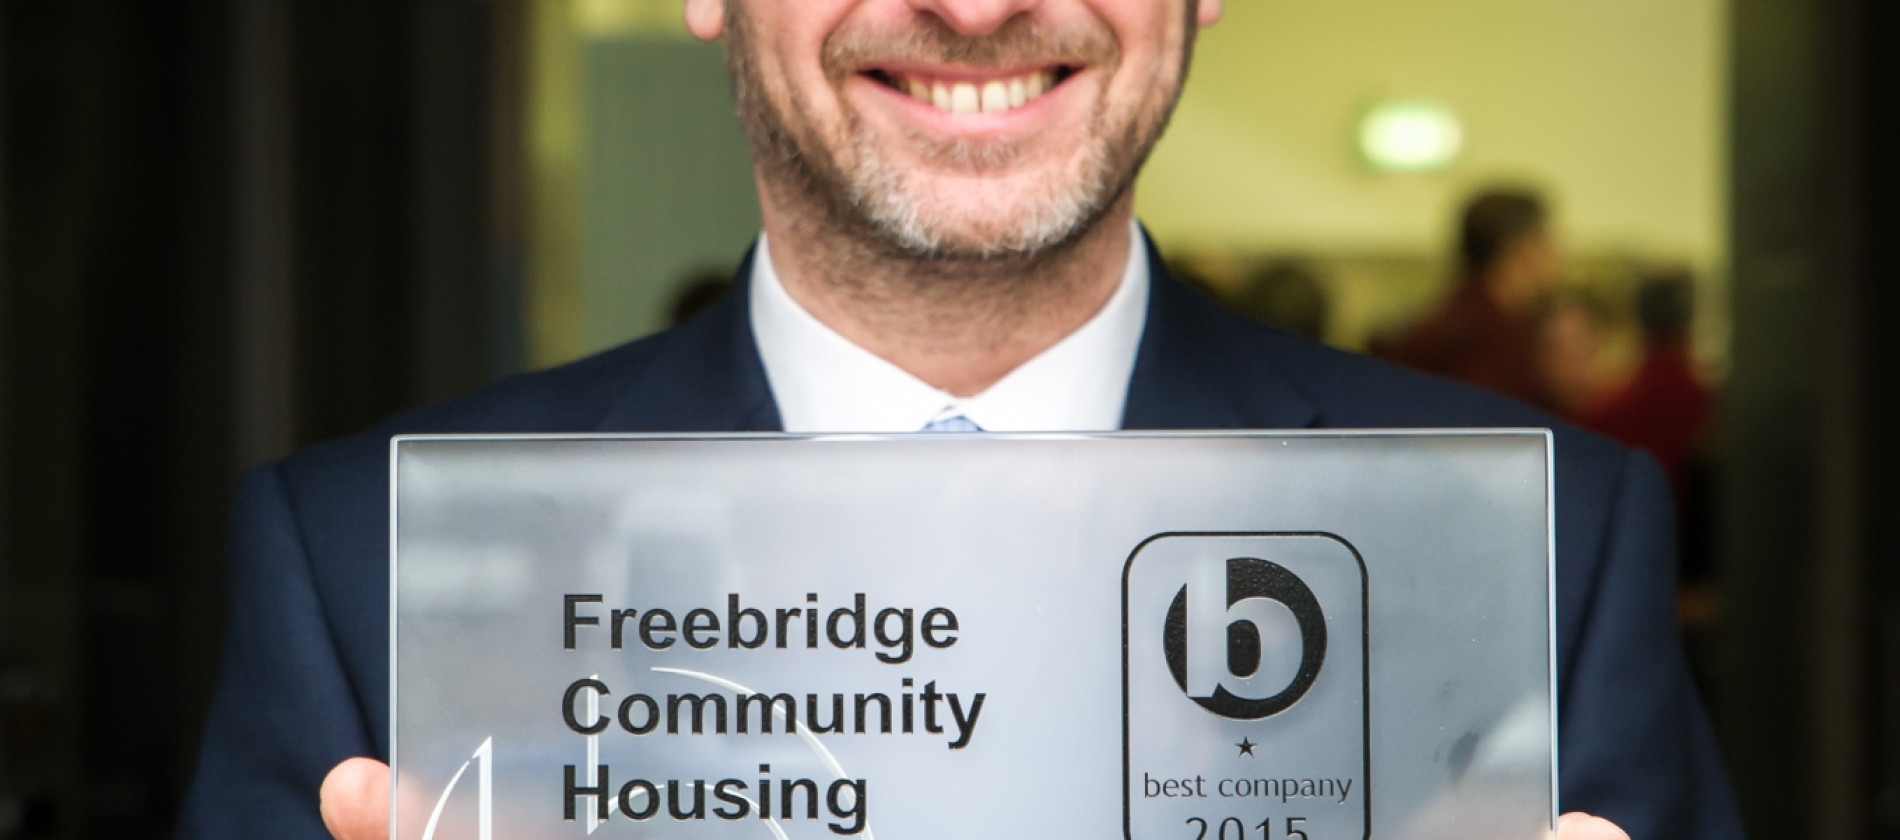 %22Tony Hall, Freebridge’s Chief Executive with our award from 2015%22